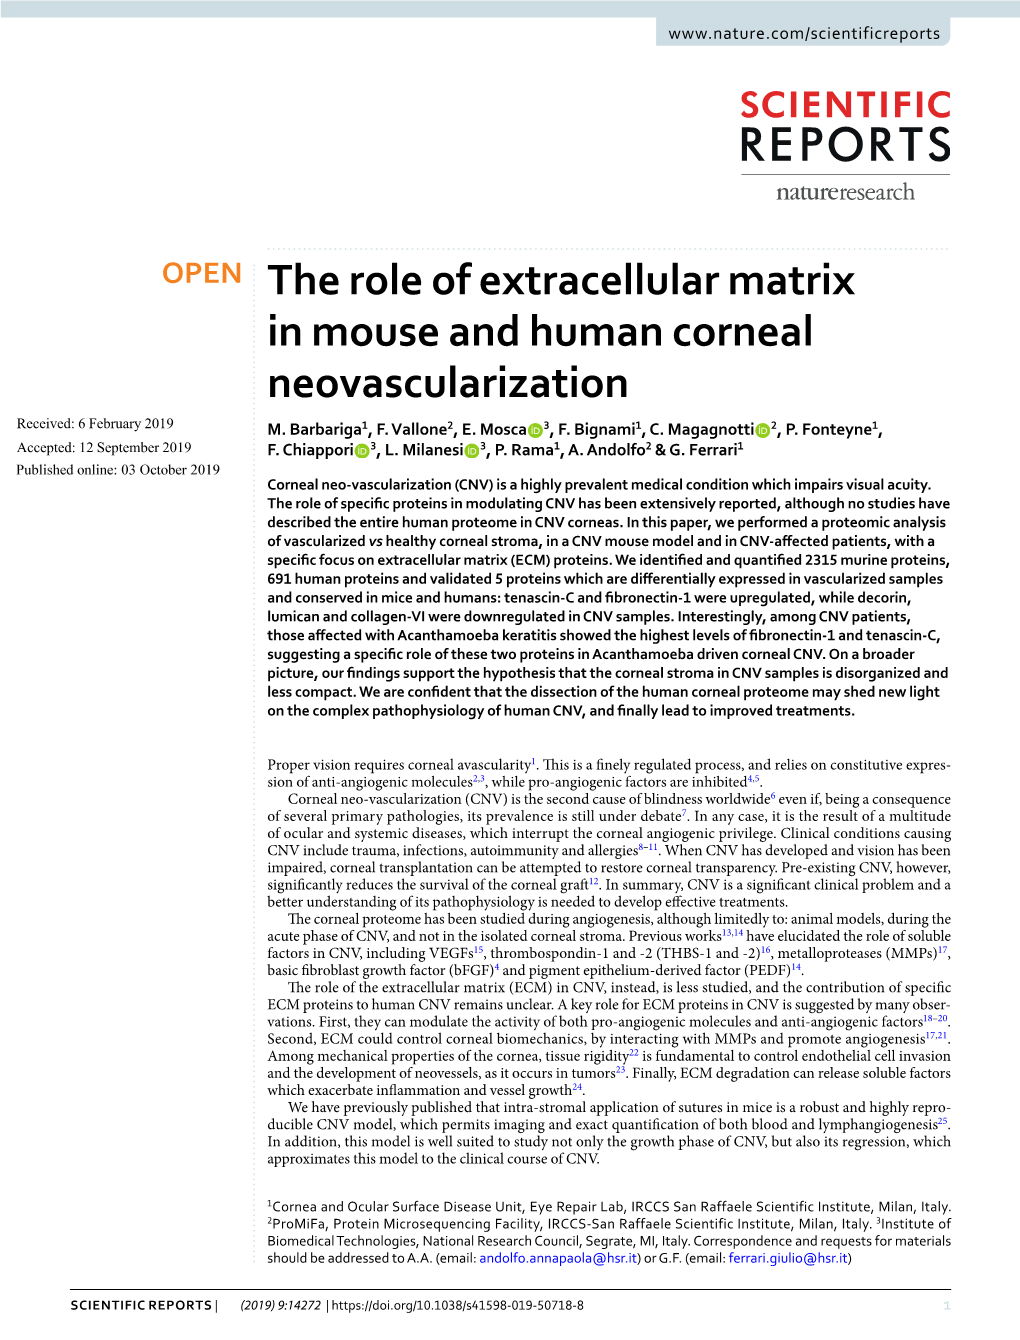 The Role of Extracellular Matrix in Mouse and Human Corneal Neovascularization Received: 6 February 2019 M